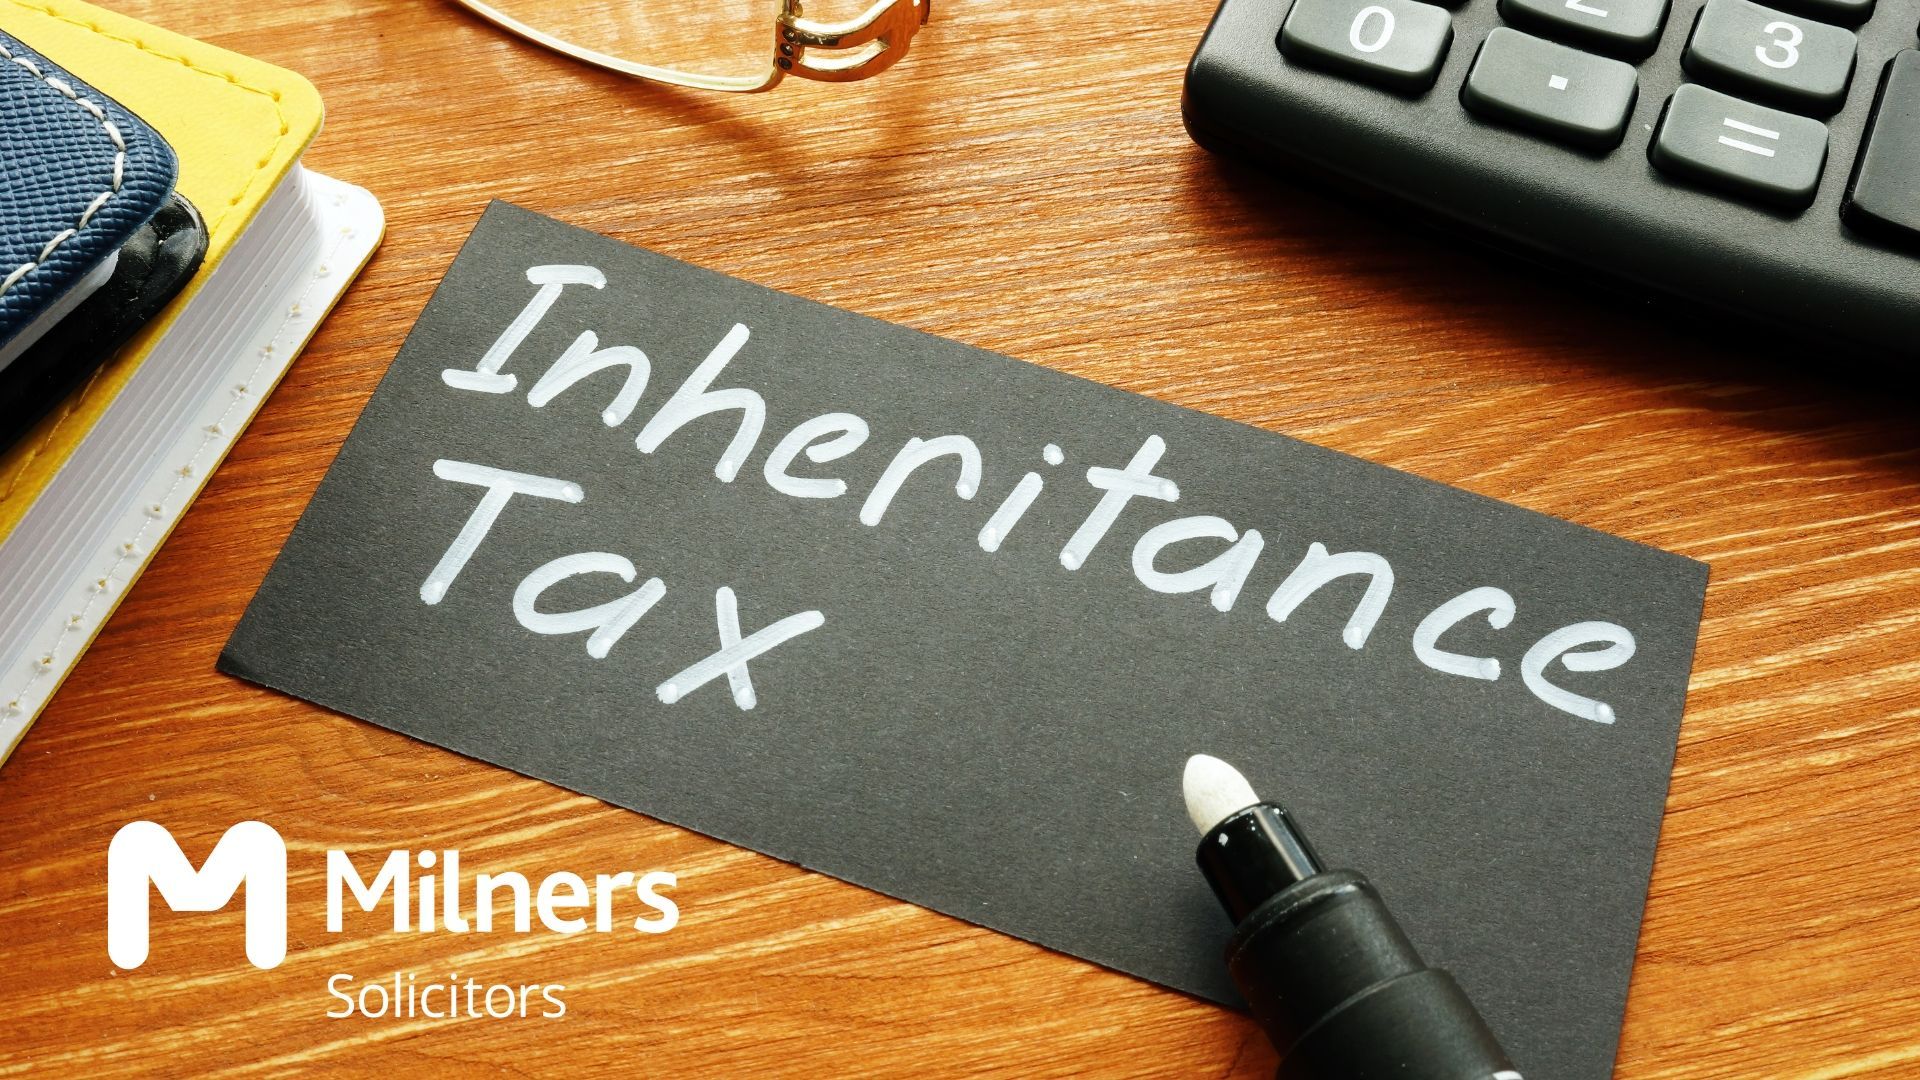 Does inheritance tax apply to you? Find out in our handy guide to this commonly misunderstood issue.